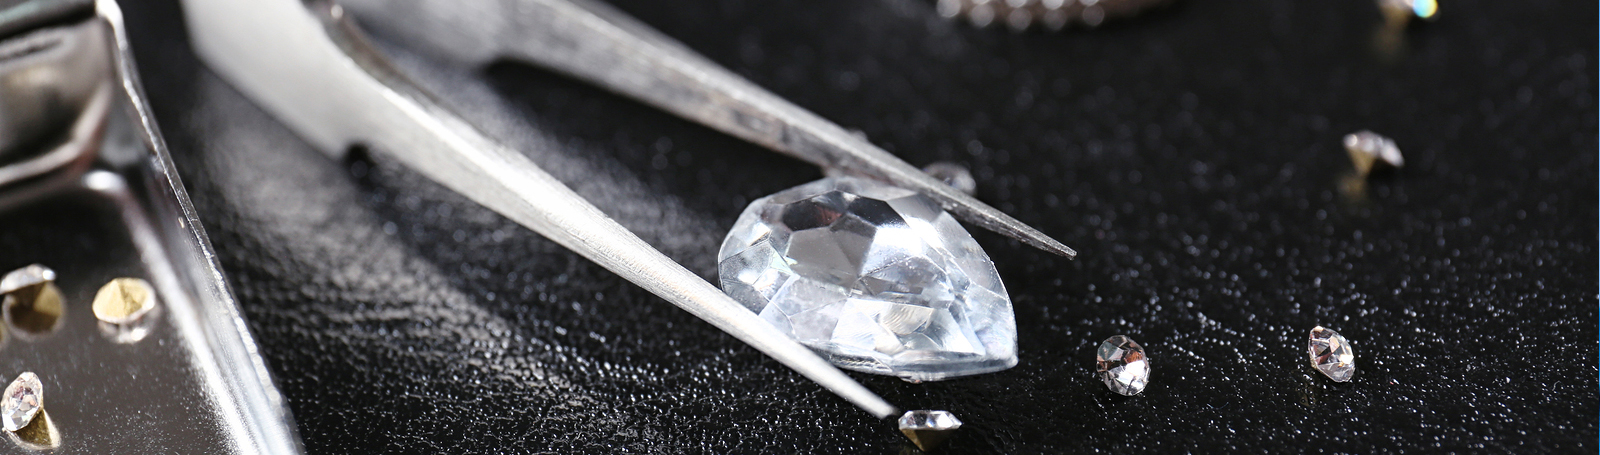 close up of a large pear shapped diamond behind held by a metalic jeweler's tool